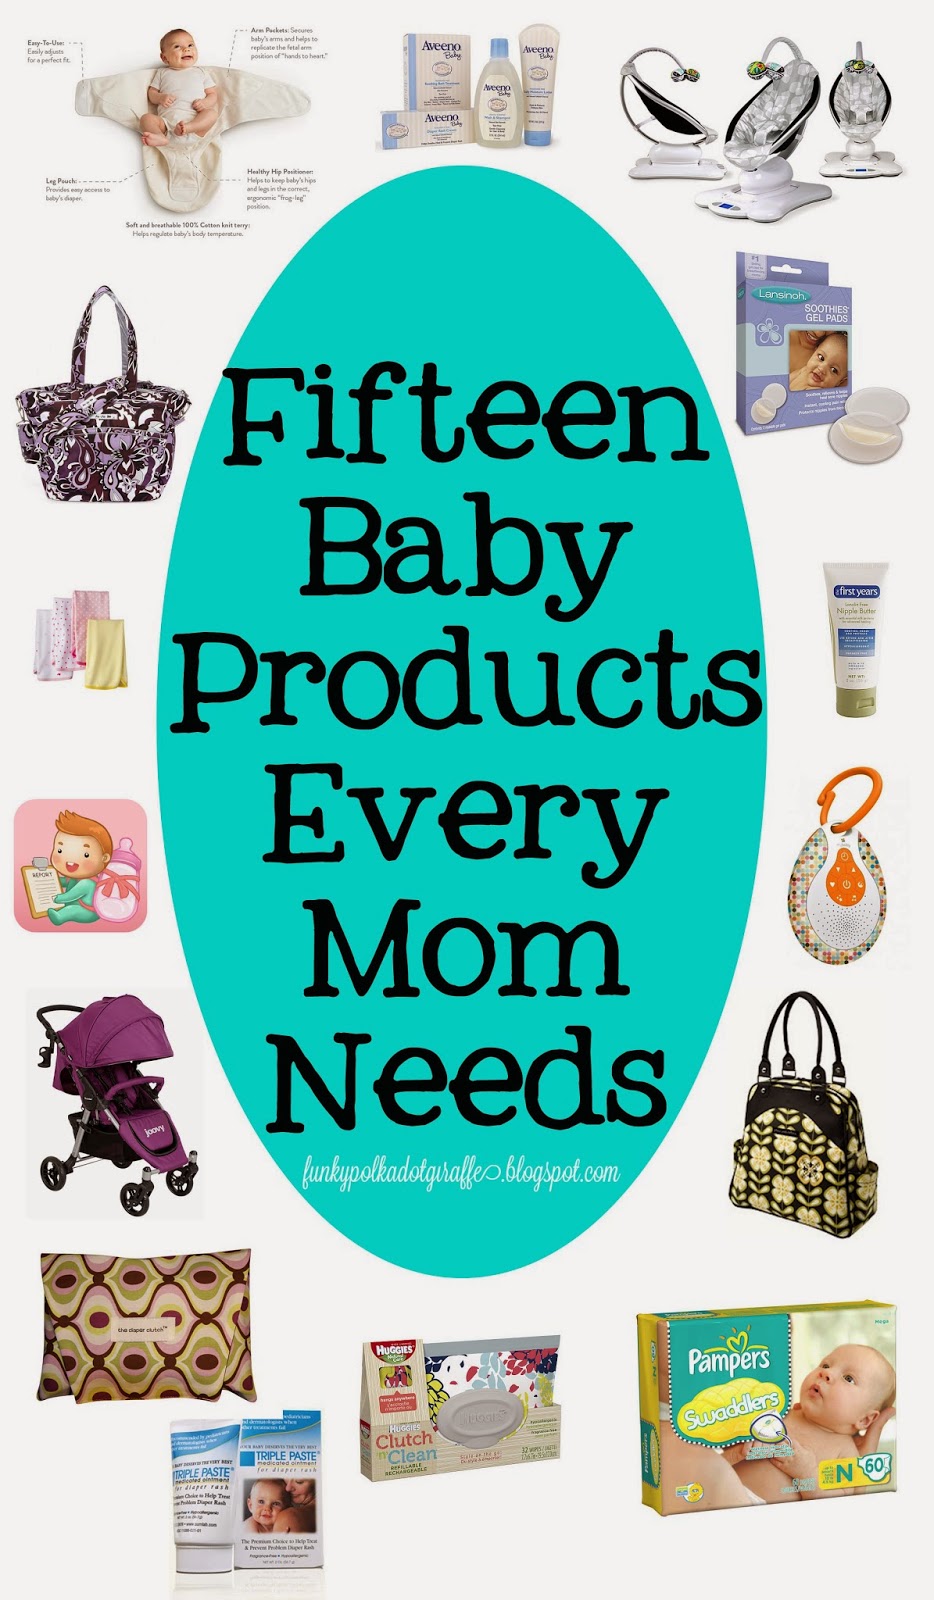 Products Every Mom Needs